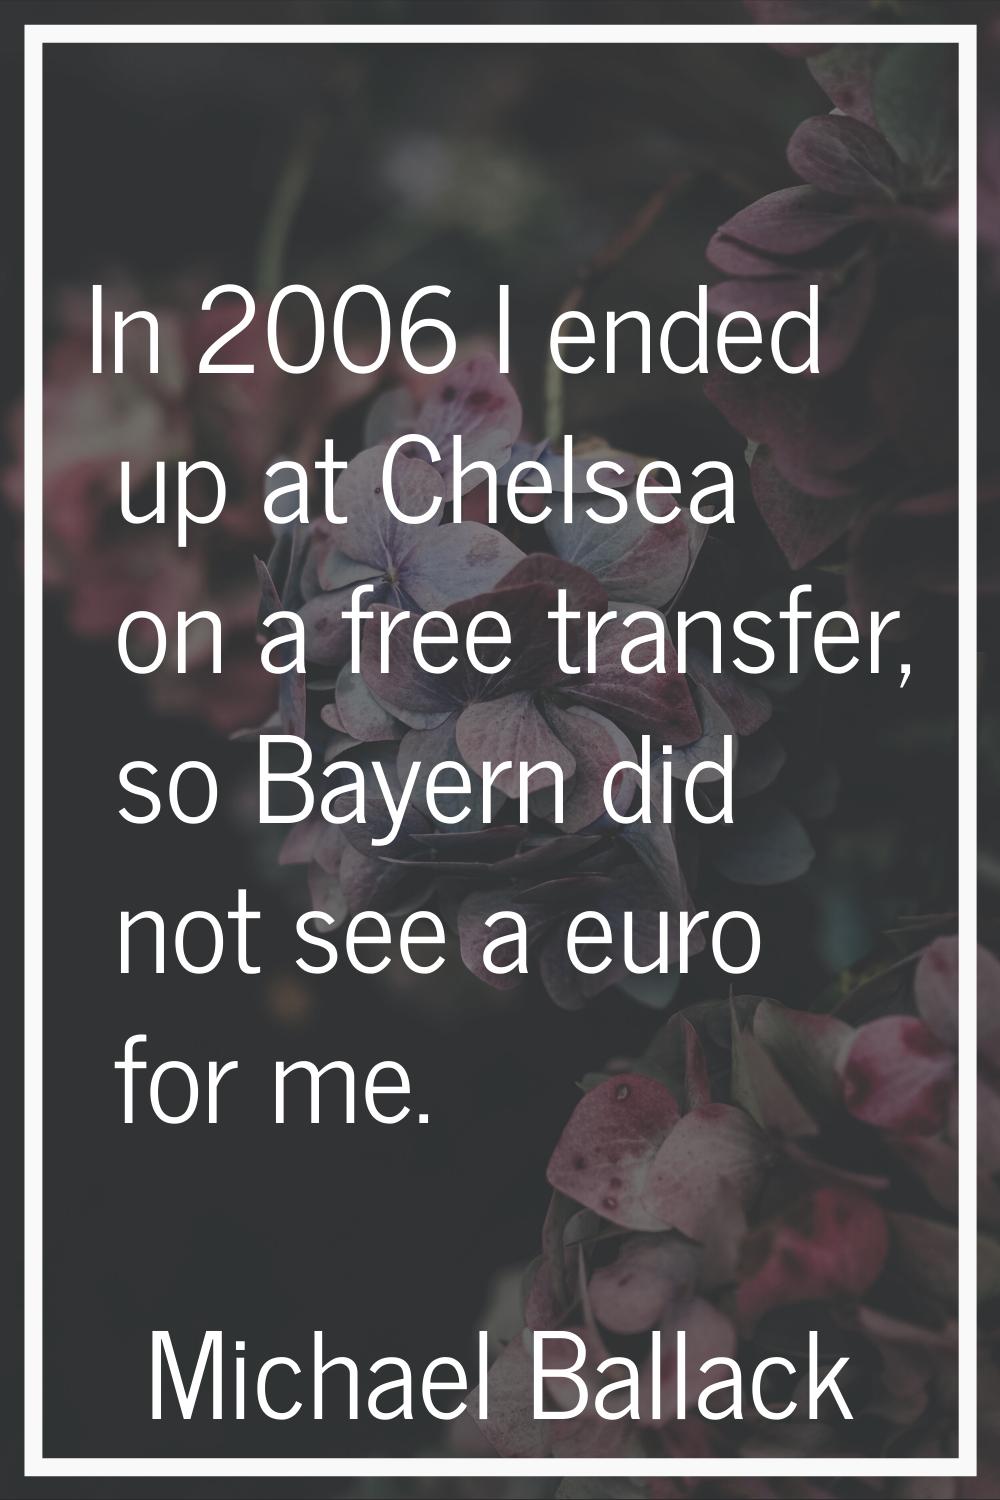 In 2006 I ended up at Chelsea on a free transfer, so Bayern did not see a euro for me.